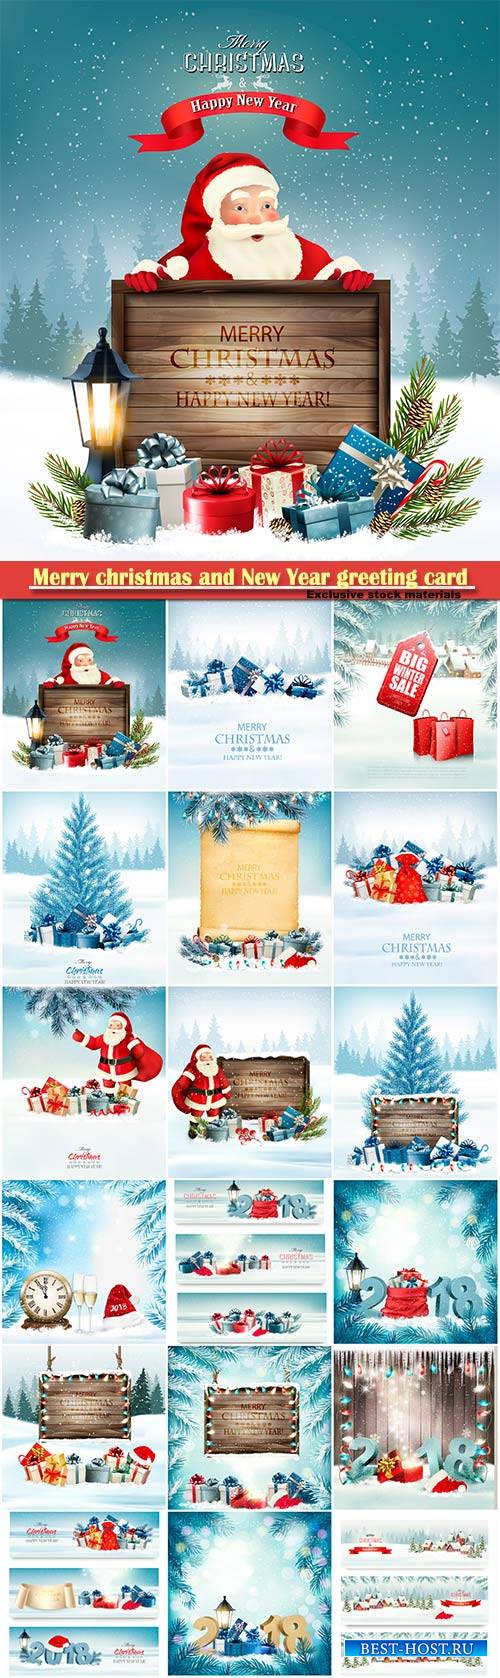 Merry christmas and New Year greeting card vector # 26